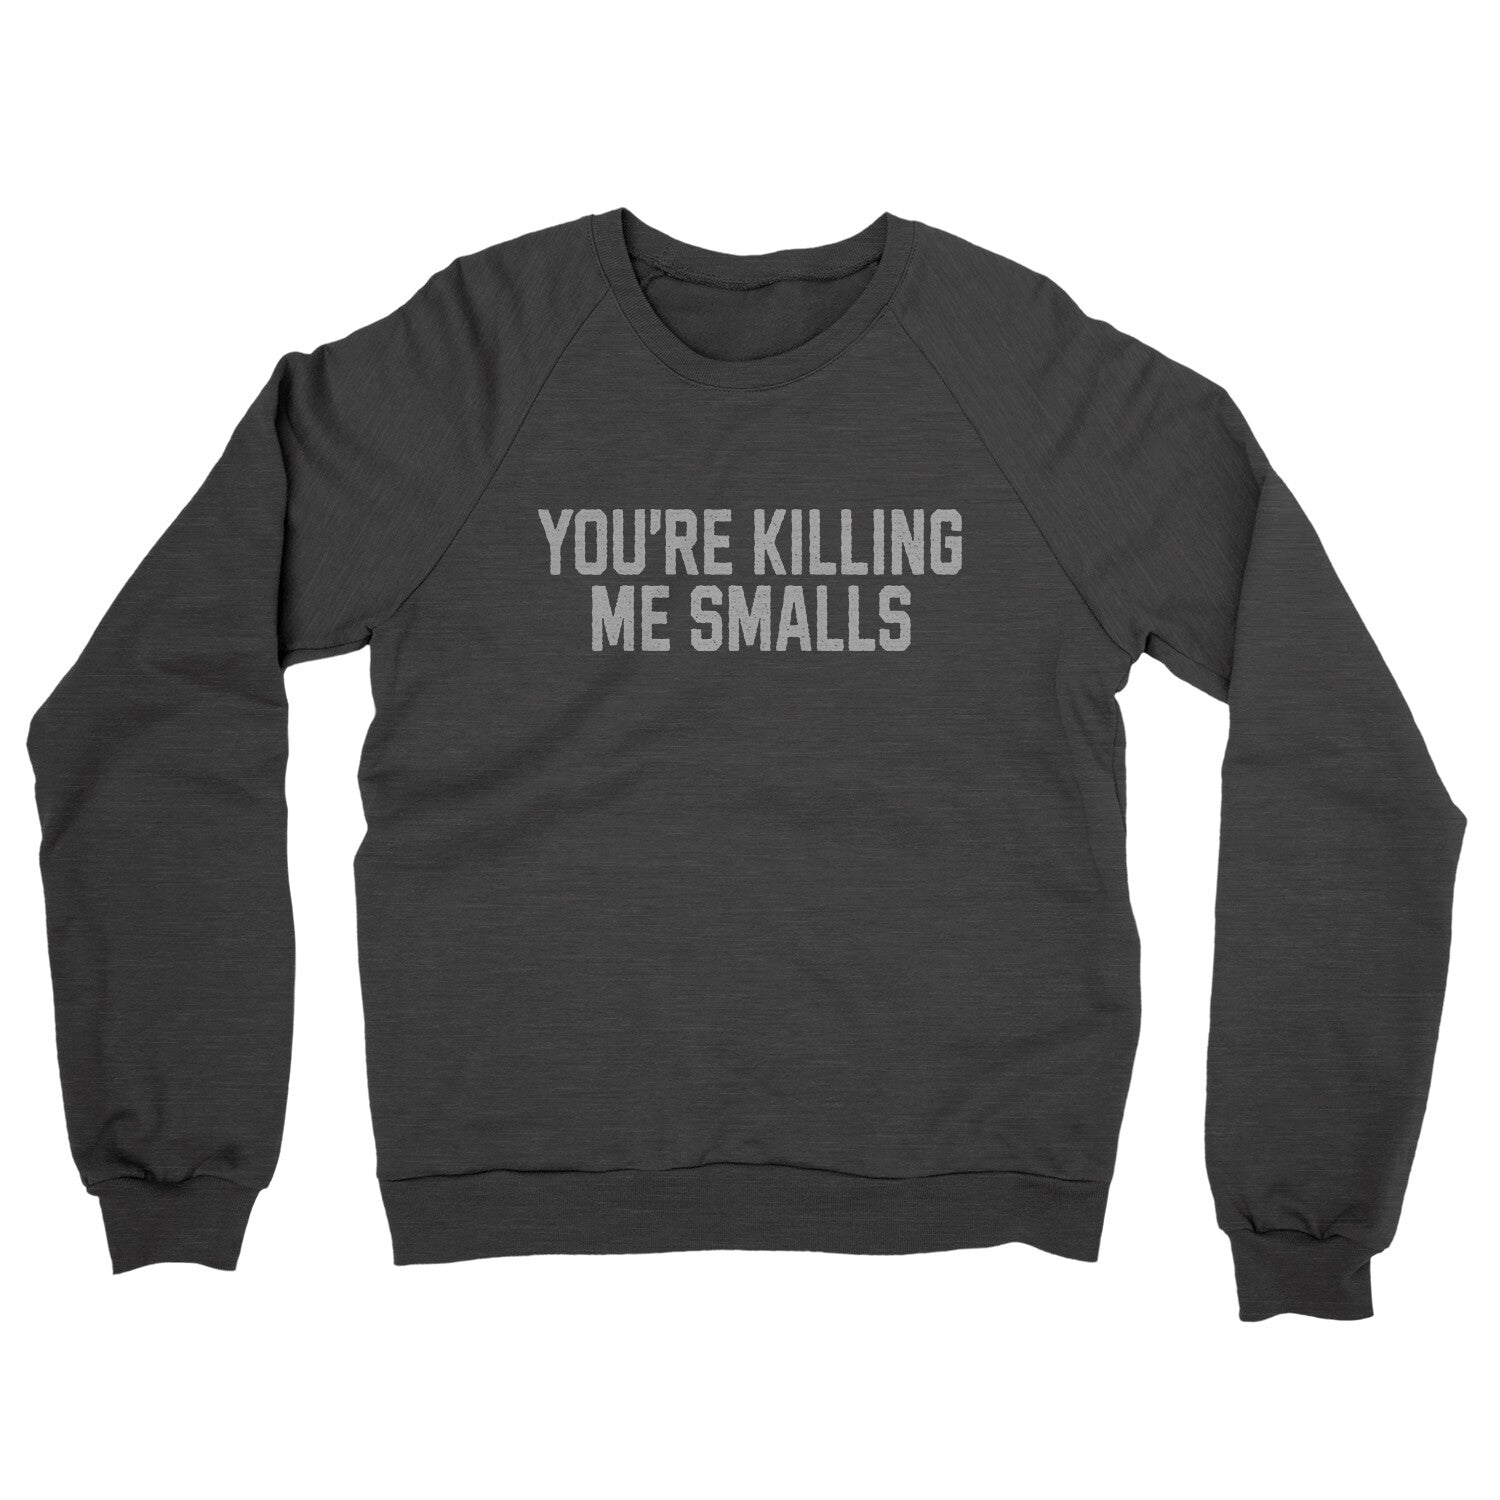 You're Killing me Smalls in Charcoal Heather Color